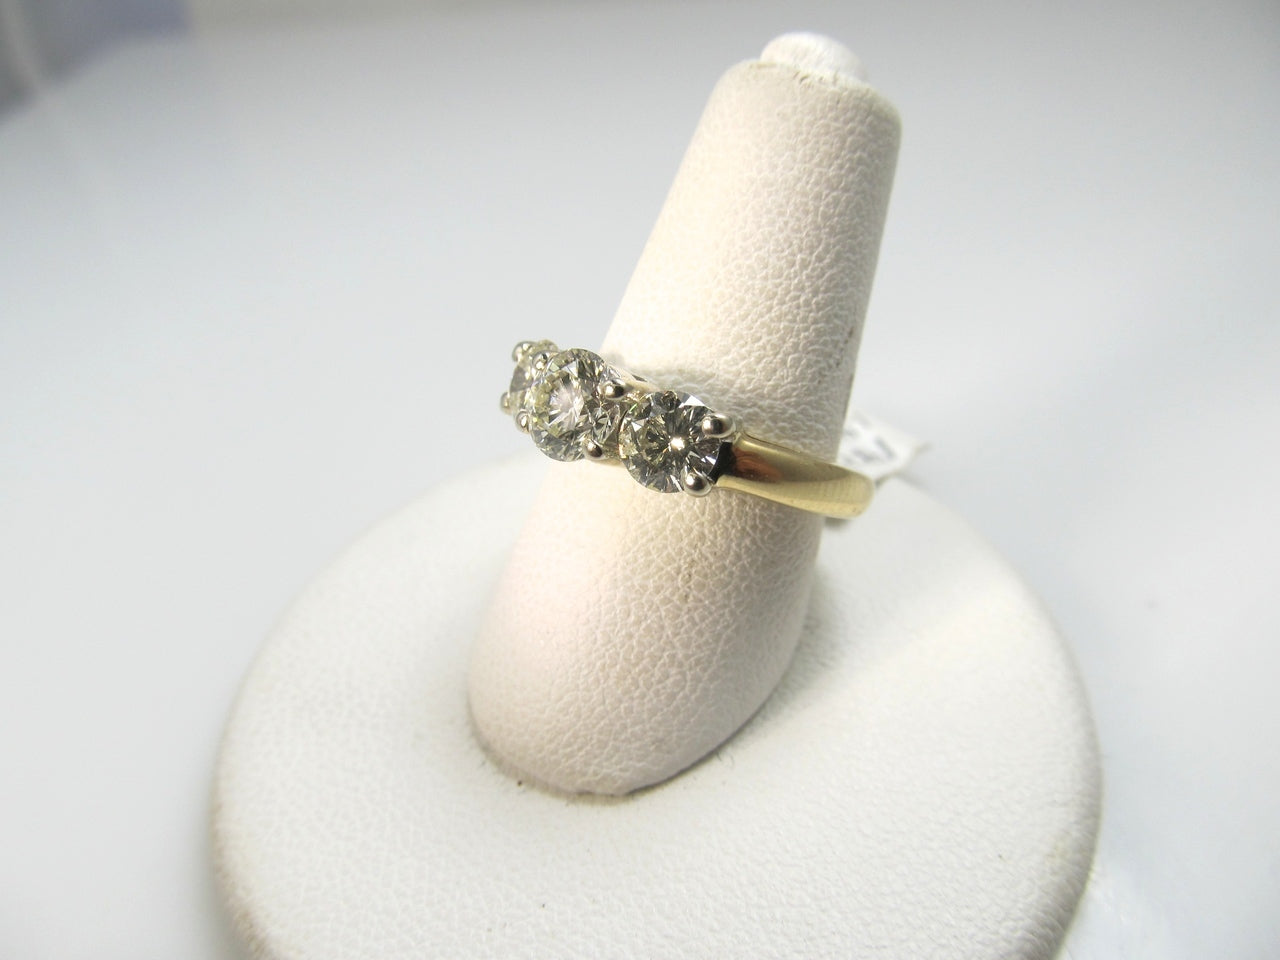 14k ring with 3 diamonds totaling 1.46cts